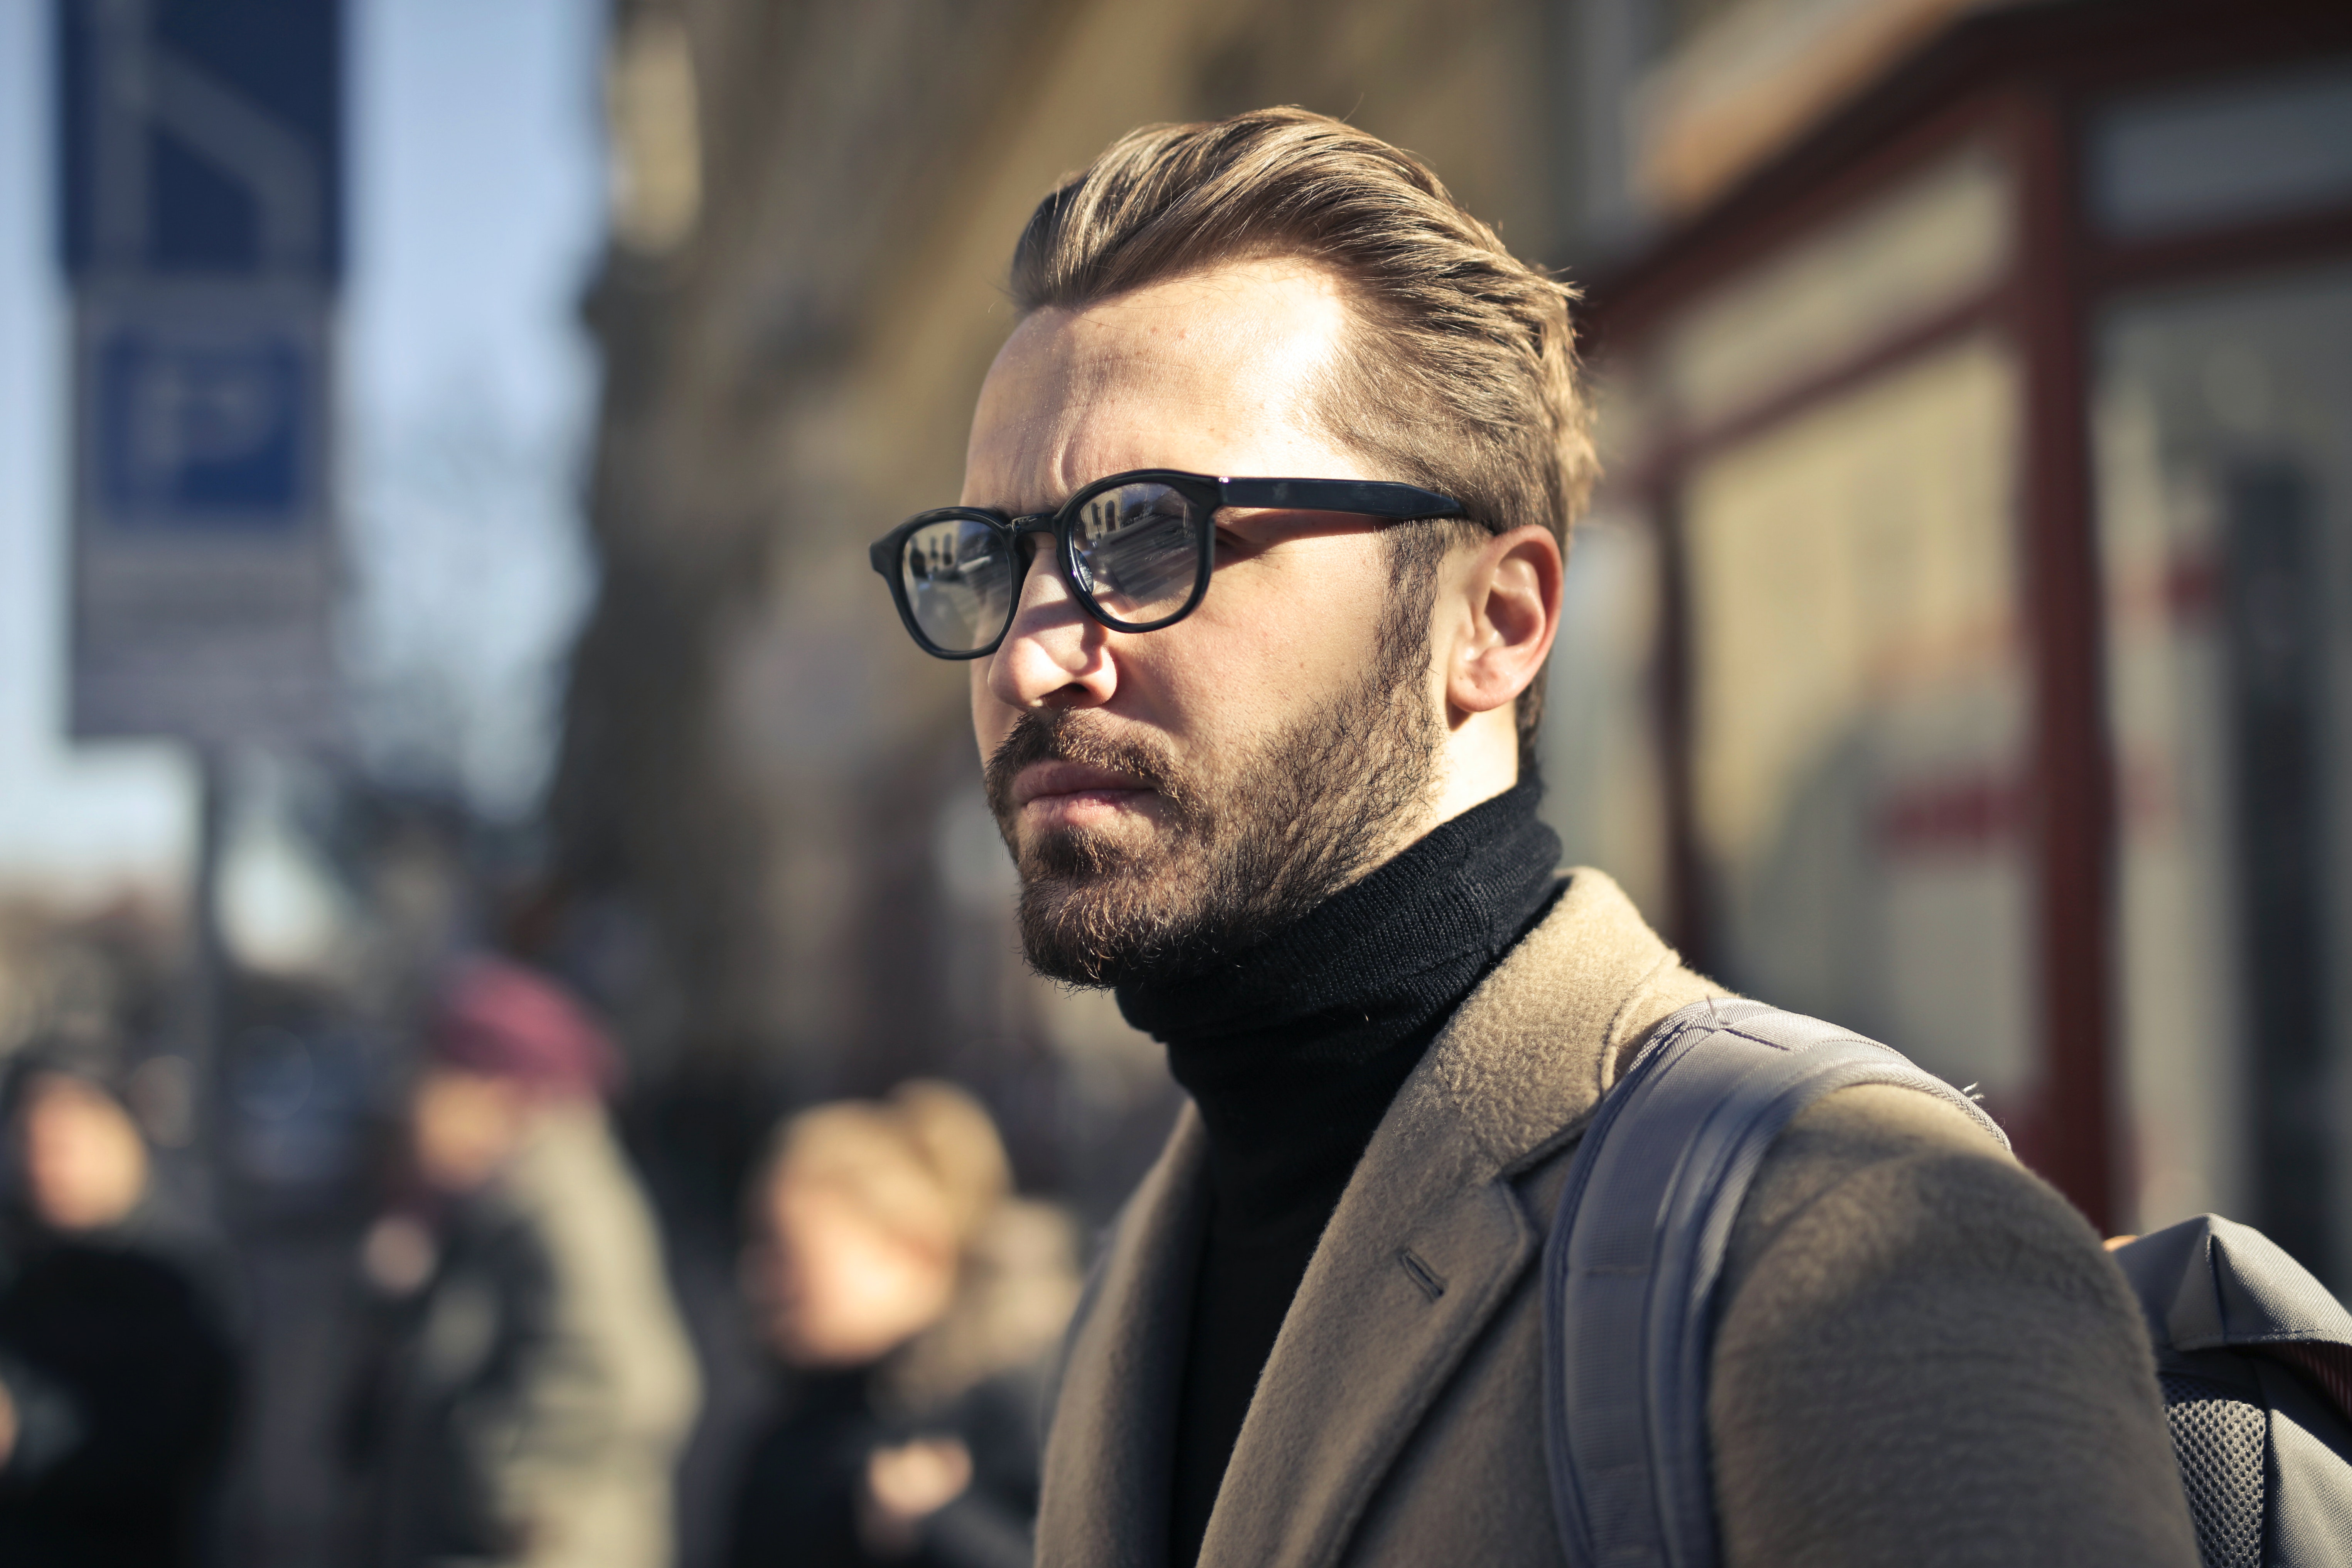 A man with glasses. | Source: Pexels